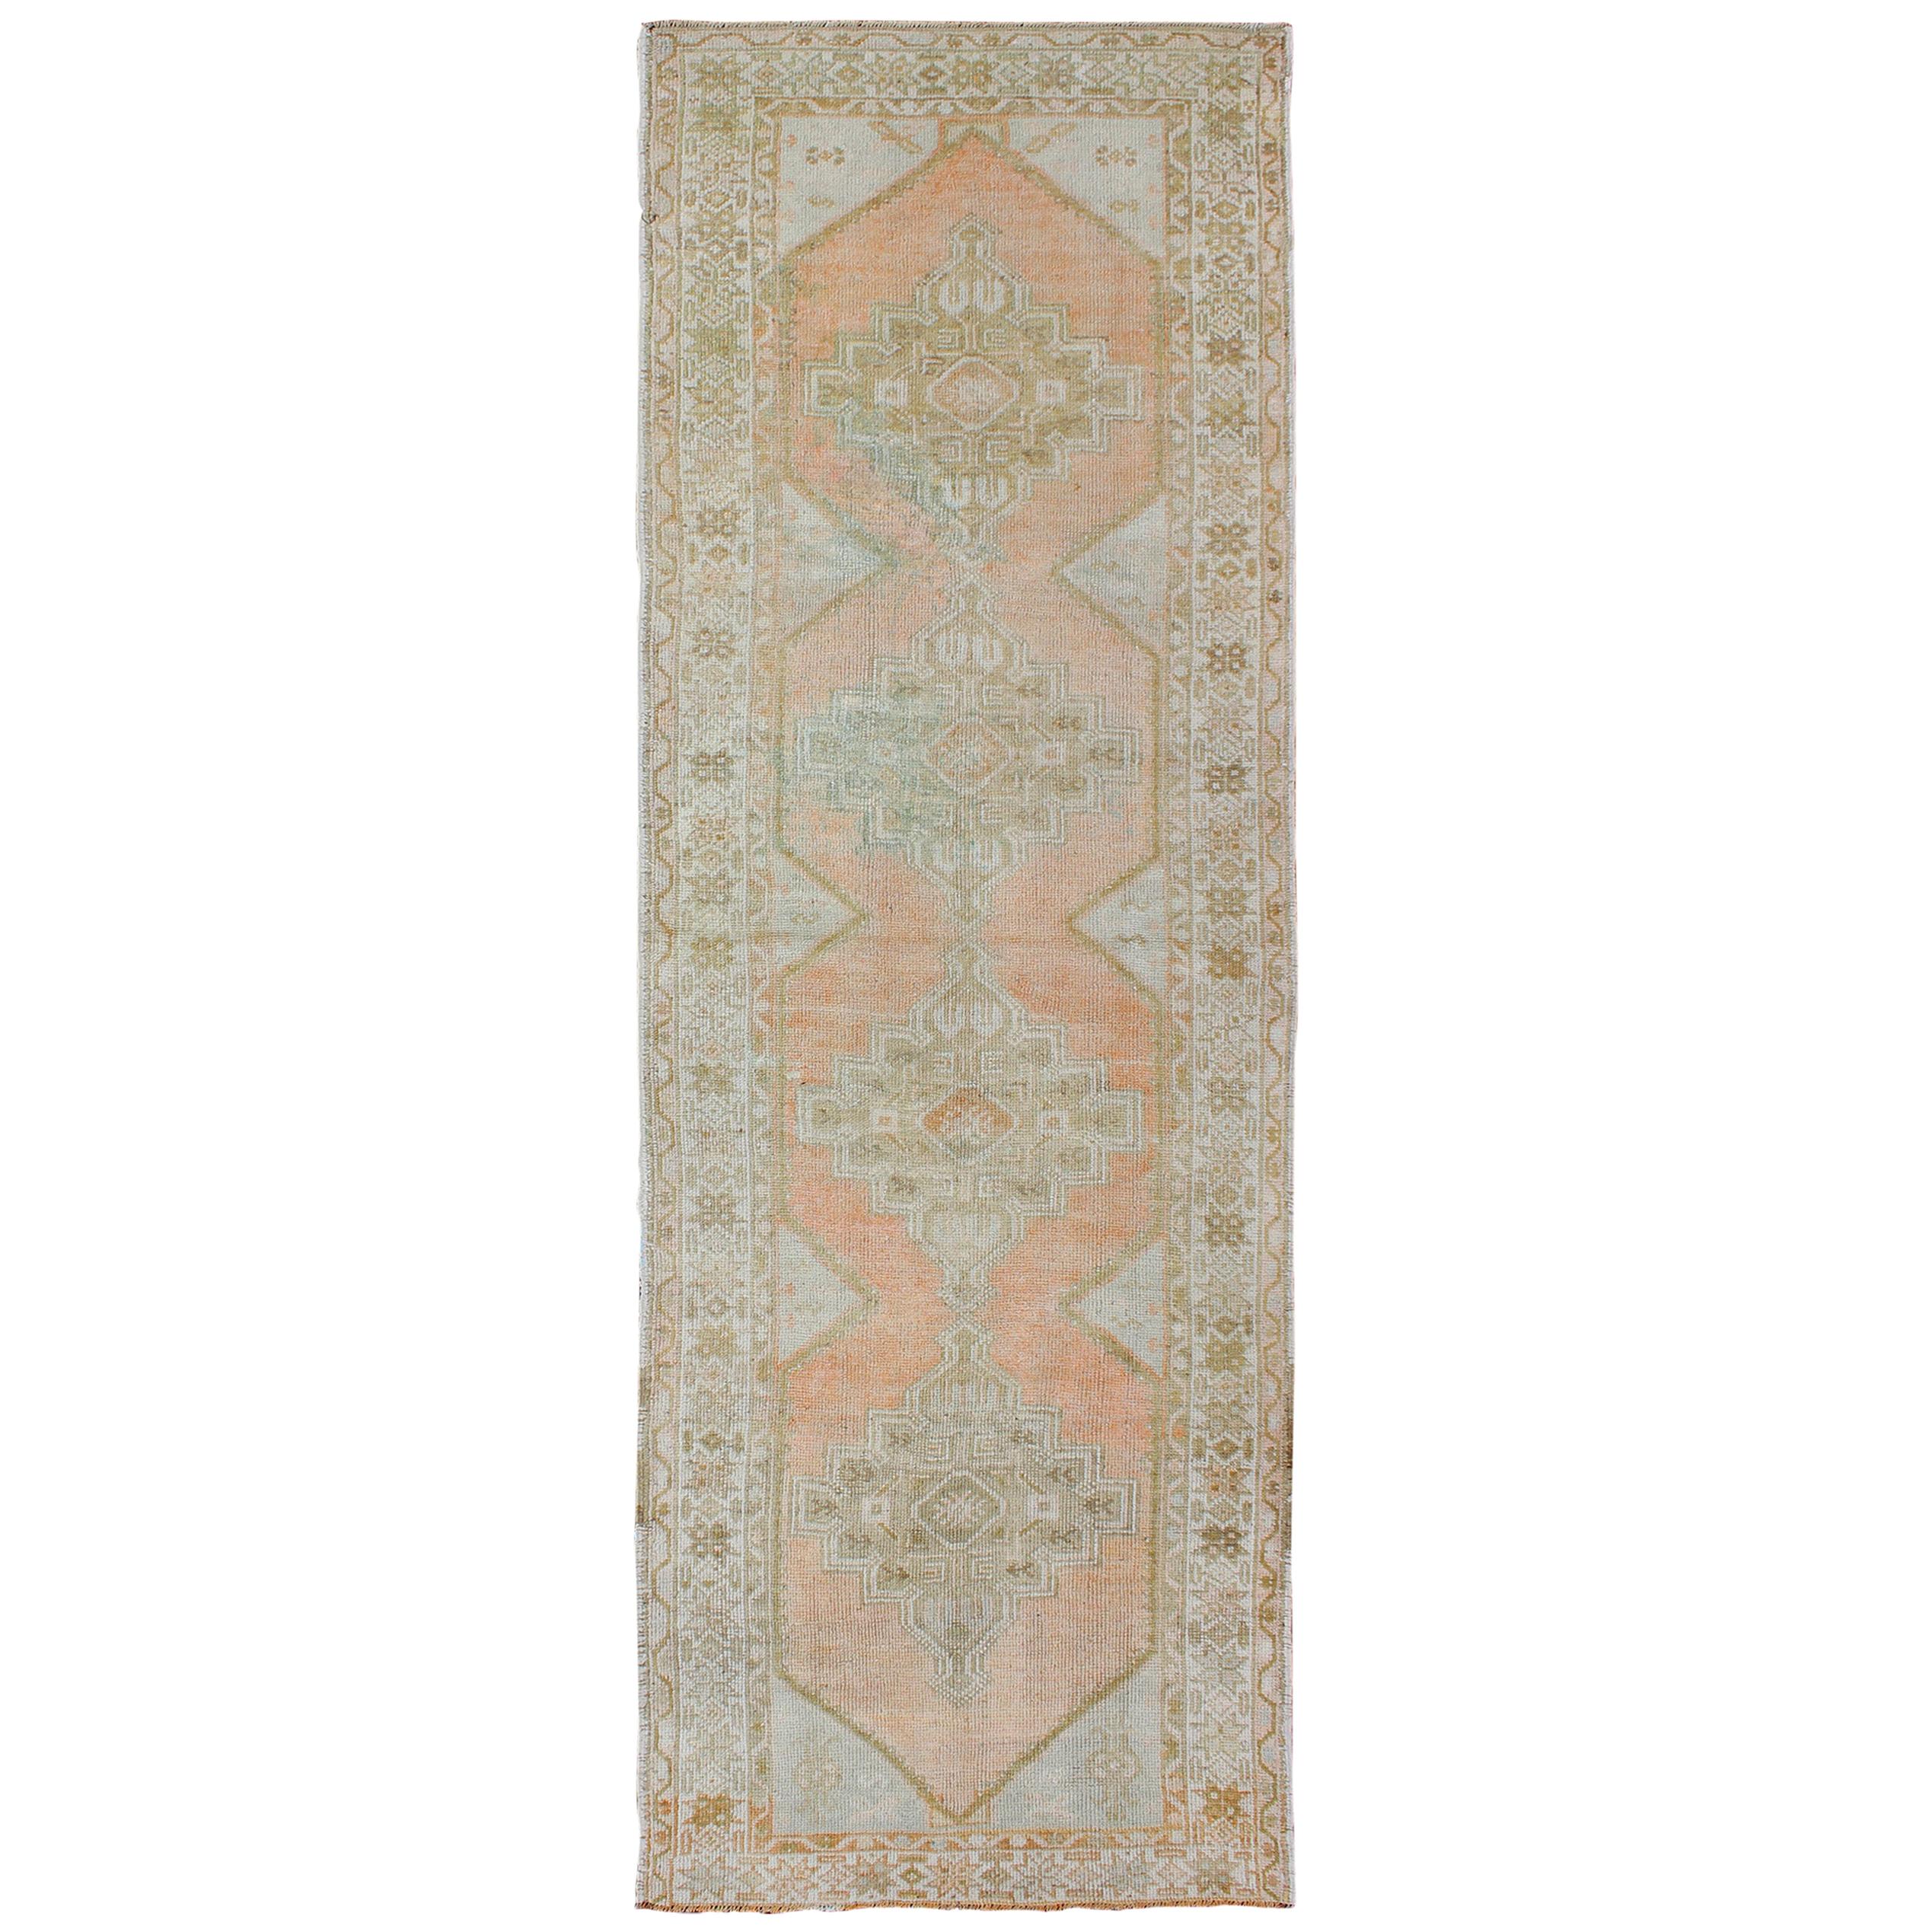 Vintage Turkish Oushak Runner with Faded Coral, Green and Light Brown